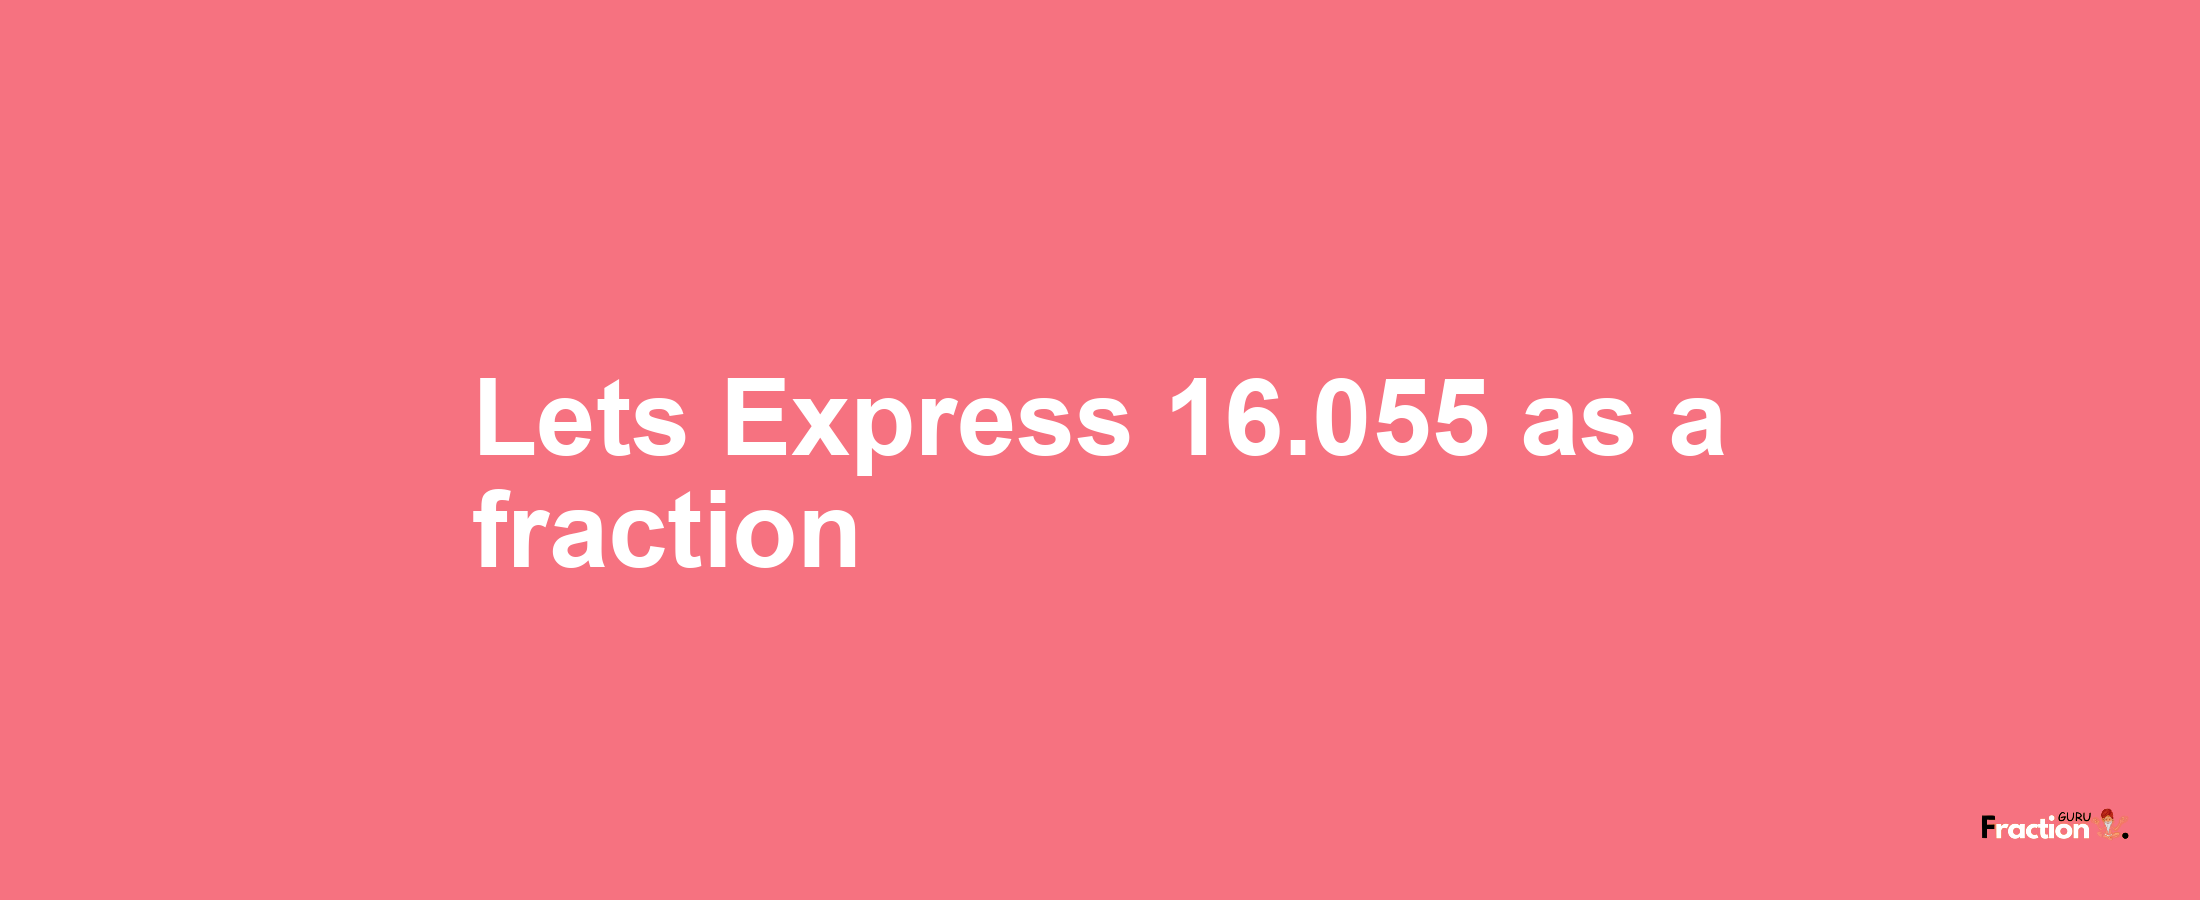 Lets Express 16.055 as afraction